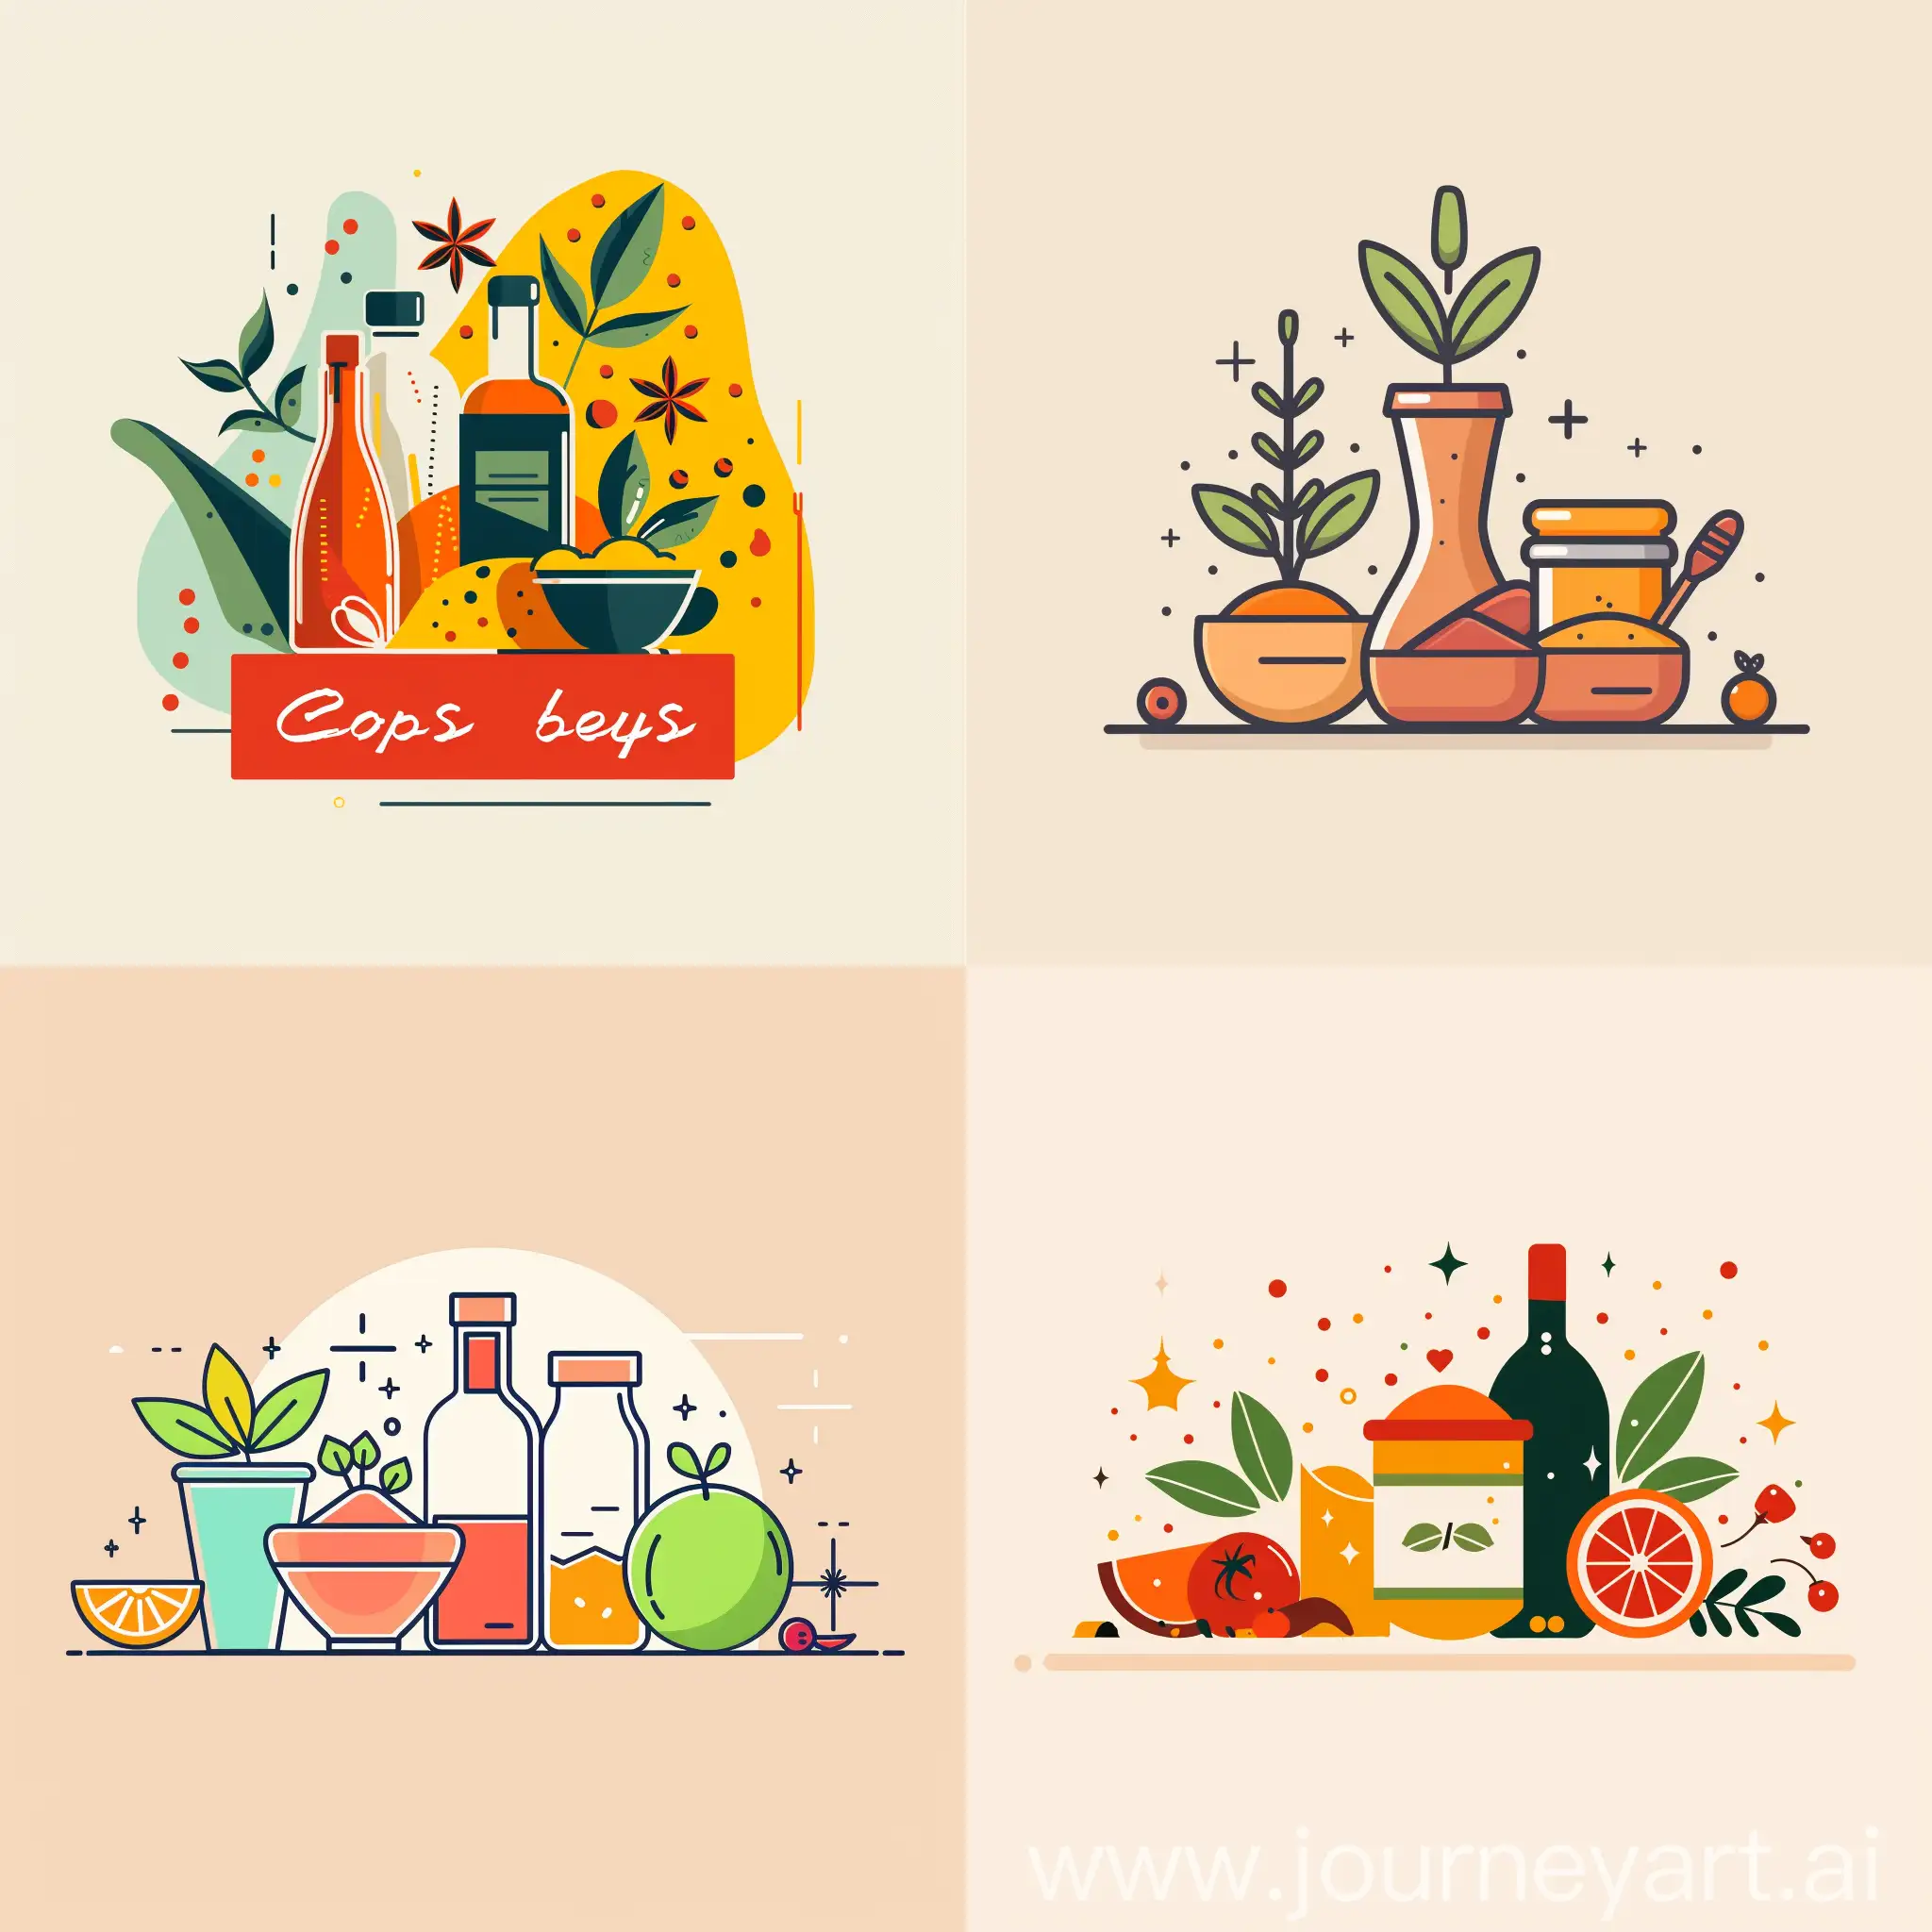 illustration a minimal graphic image about "How to build spice store website design" with a plain color background
